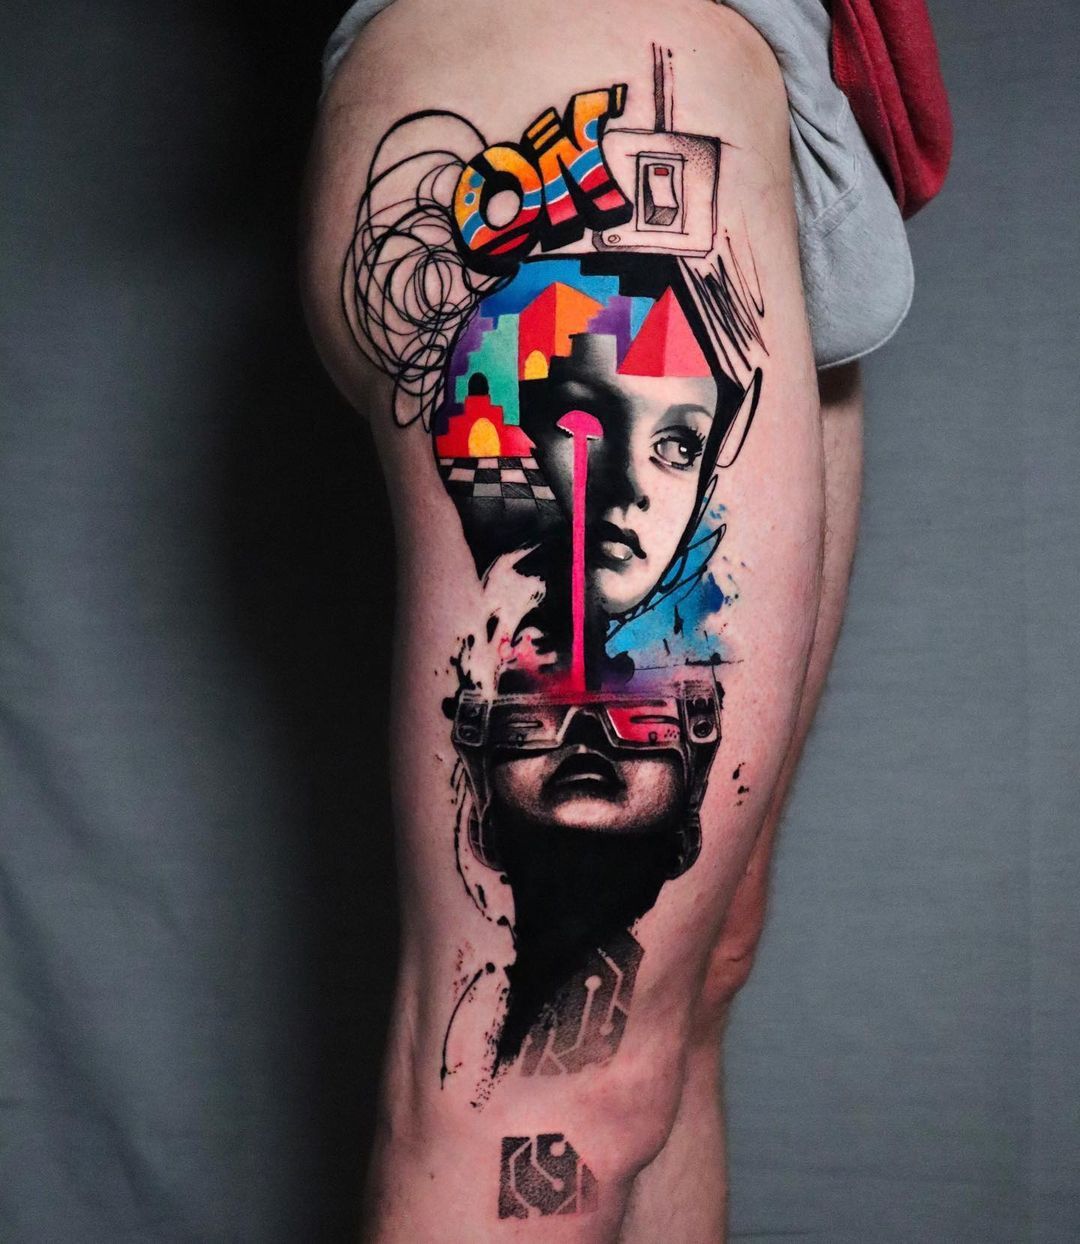 Hardpainting watercolor tattoo by Marco Pepe